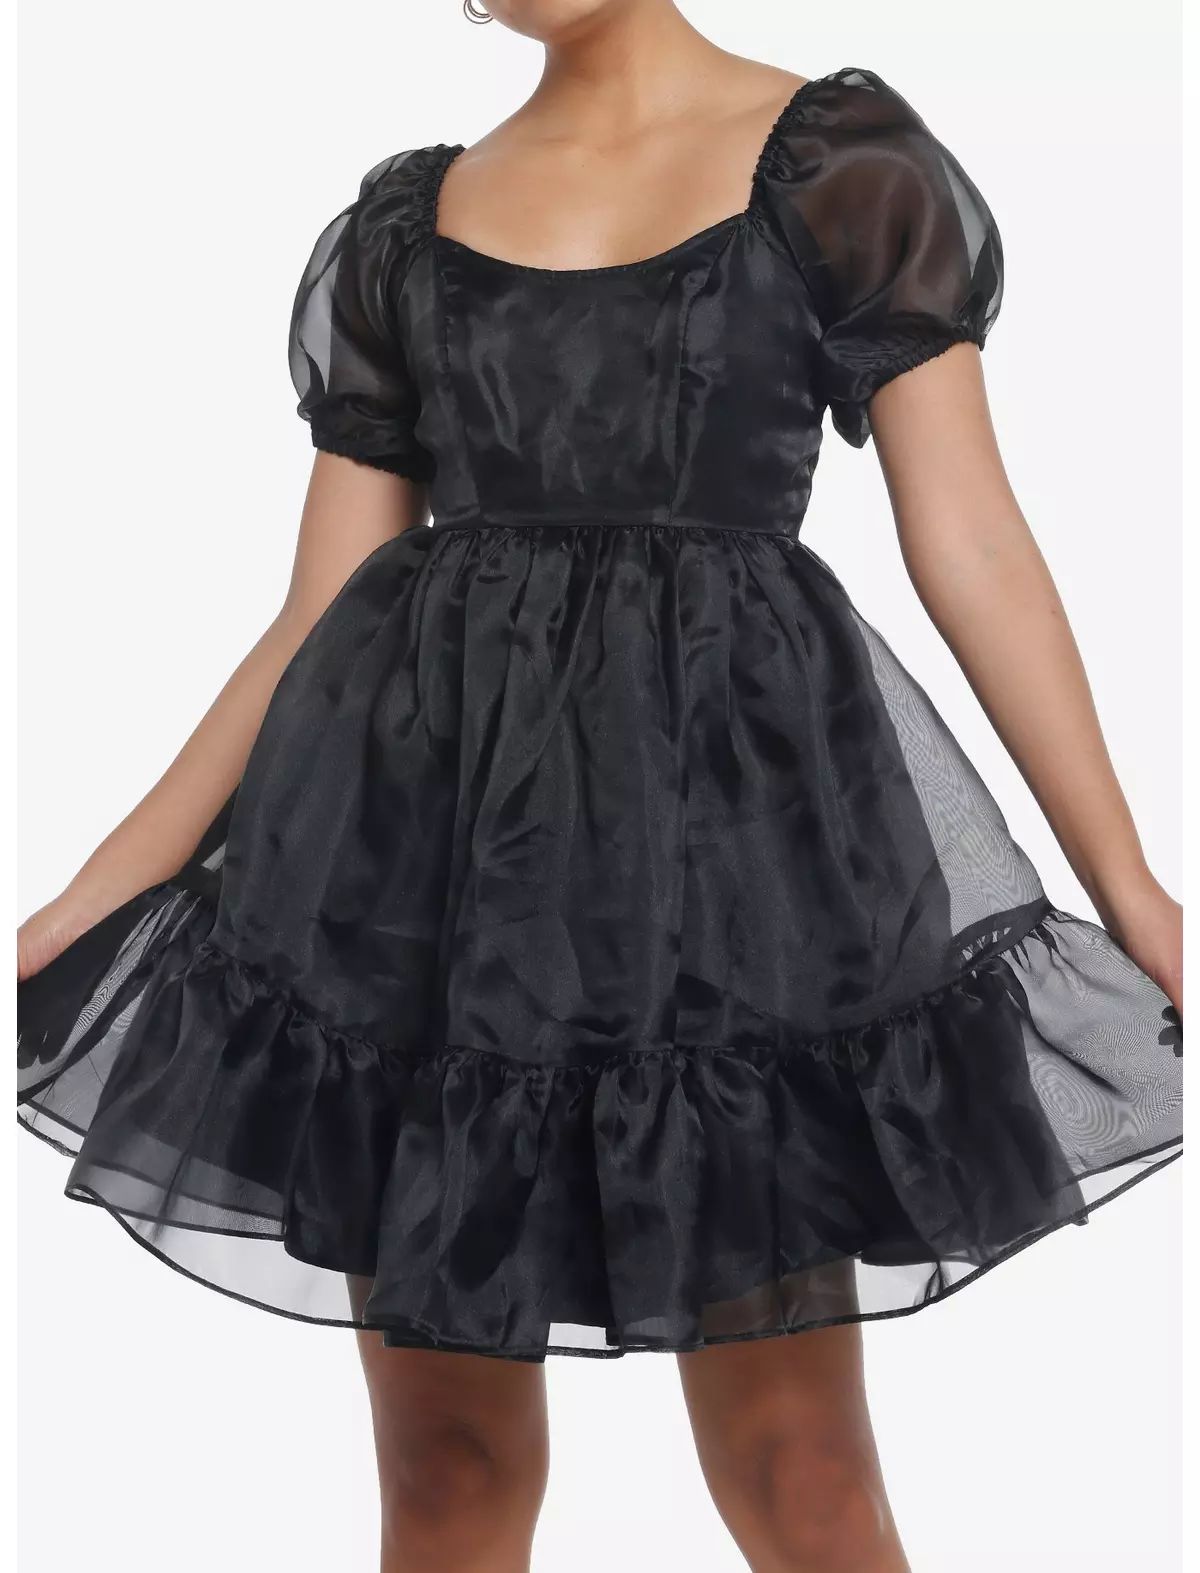 Thorn & Fable Black Organza Tiered Dress | Hot Topic | Hot Topic